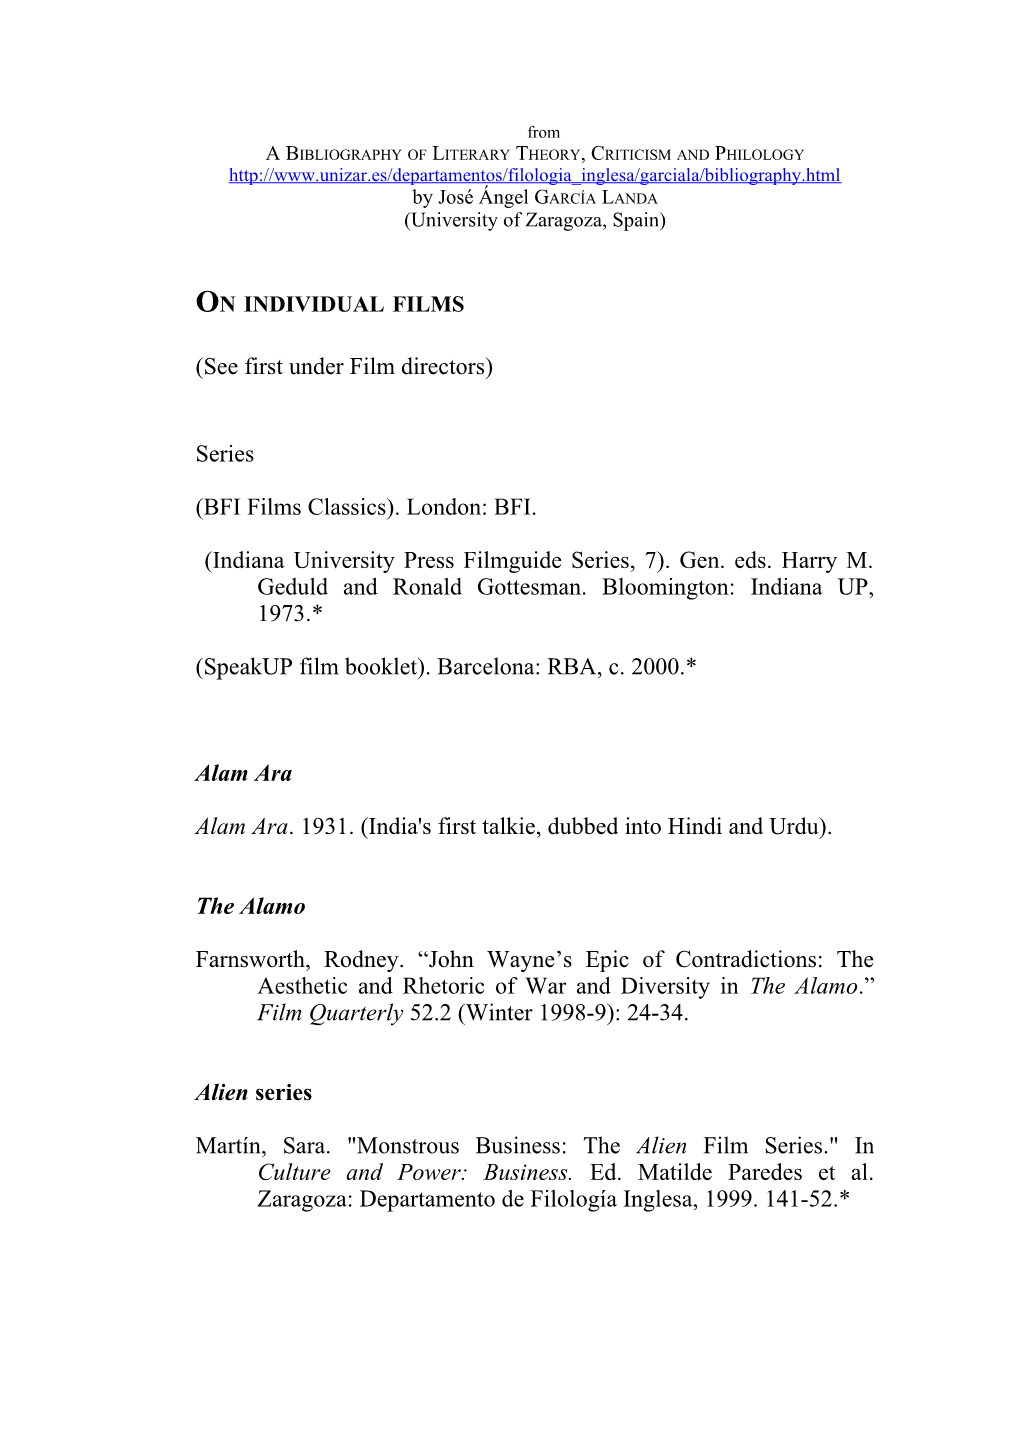 A Bibliography of Literary Theory, Criticism and Philology s28